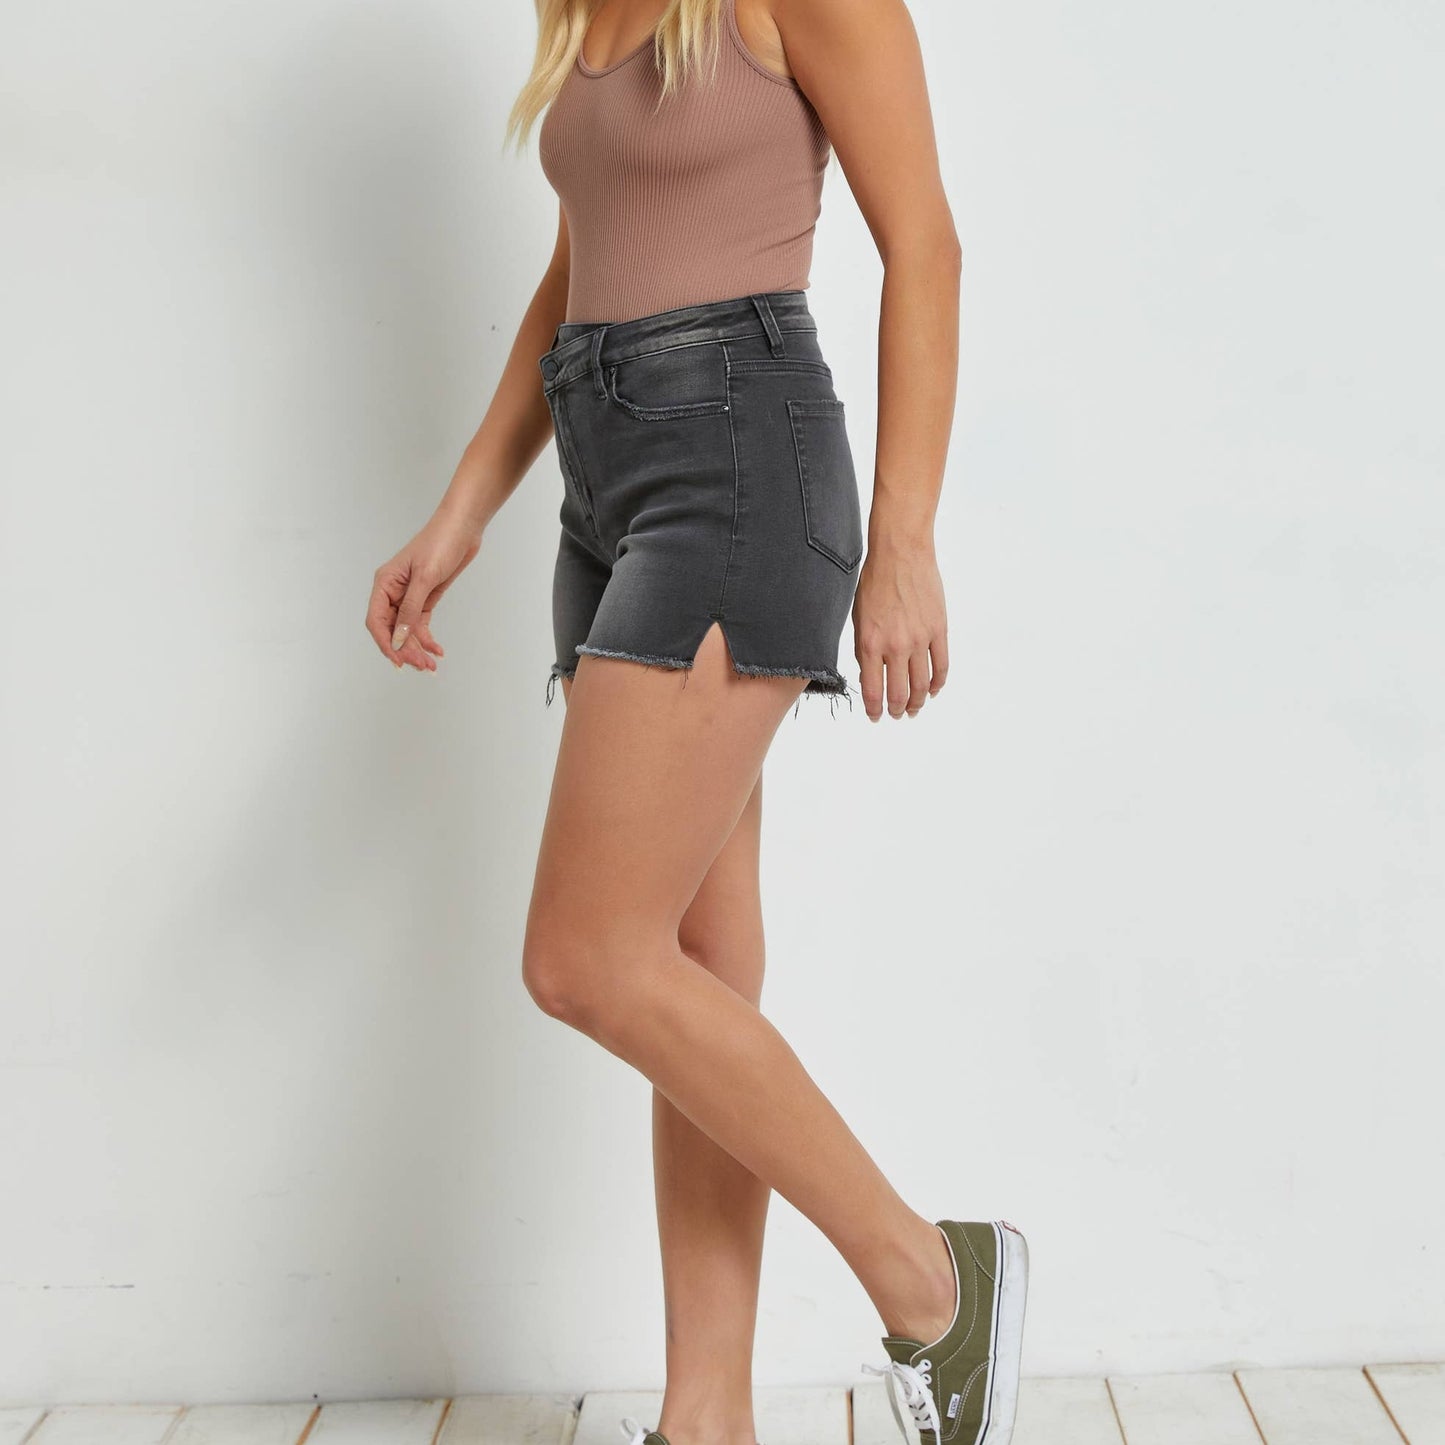 HIGH RISE SHORTS WITH CROSS OVER SIDE SLIT